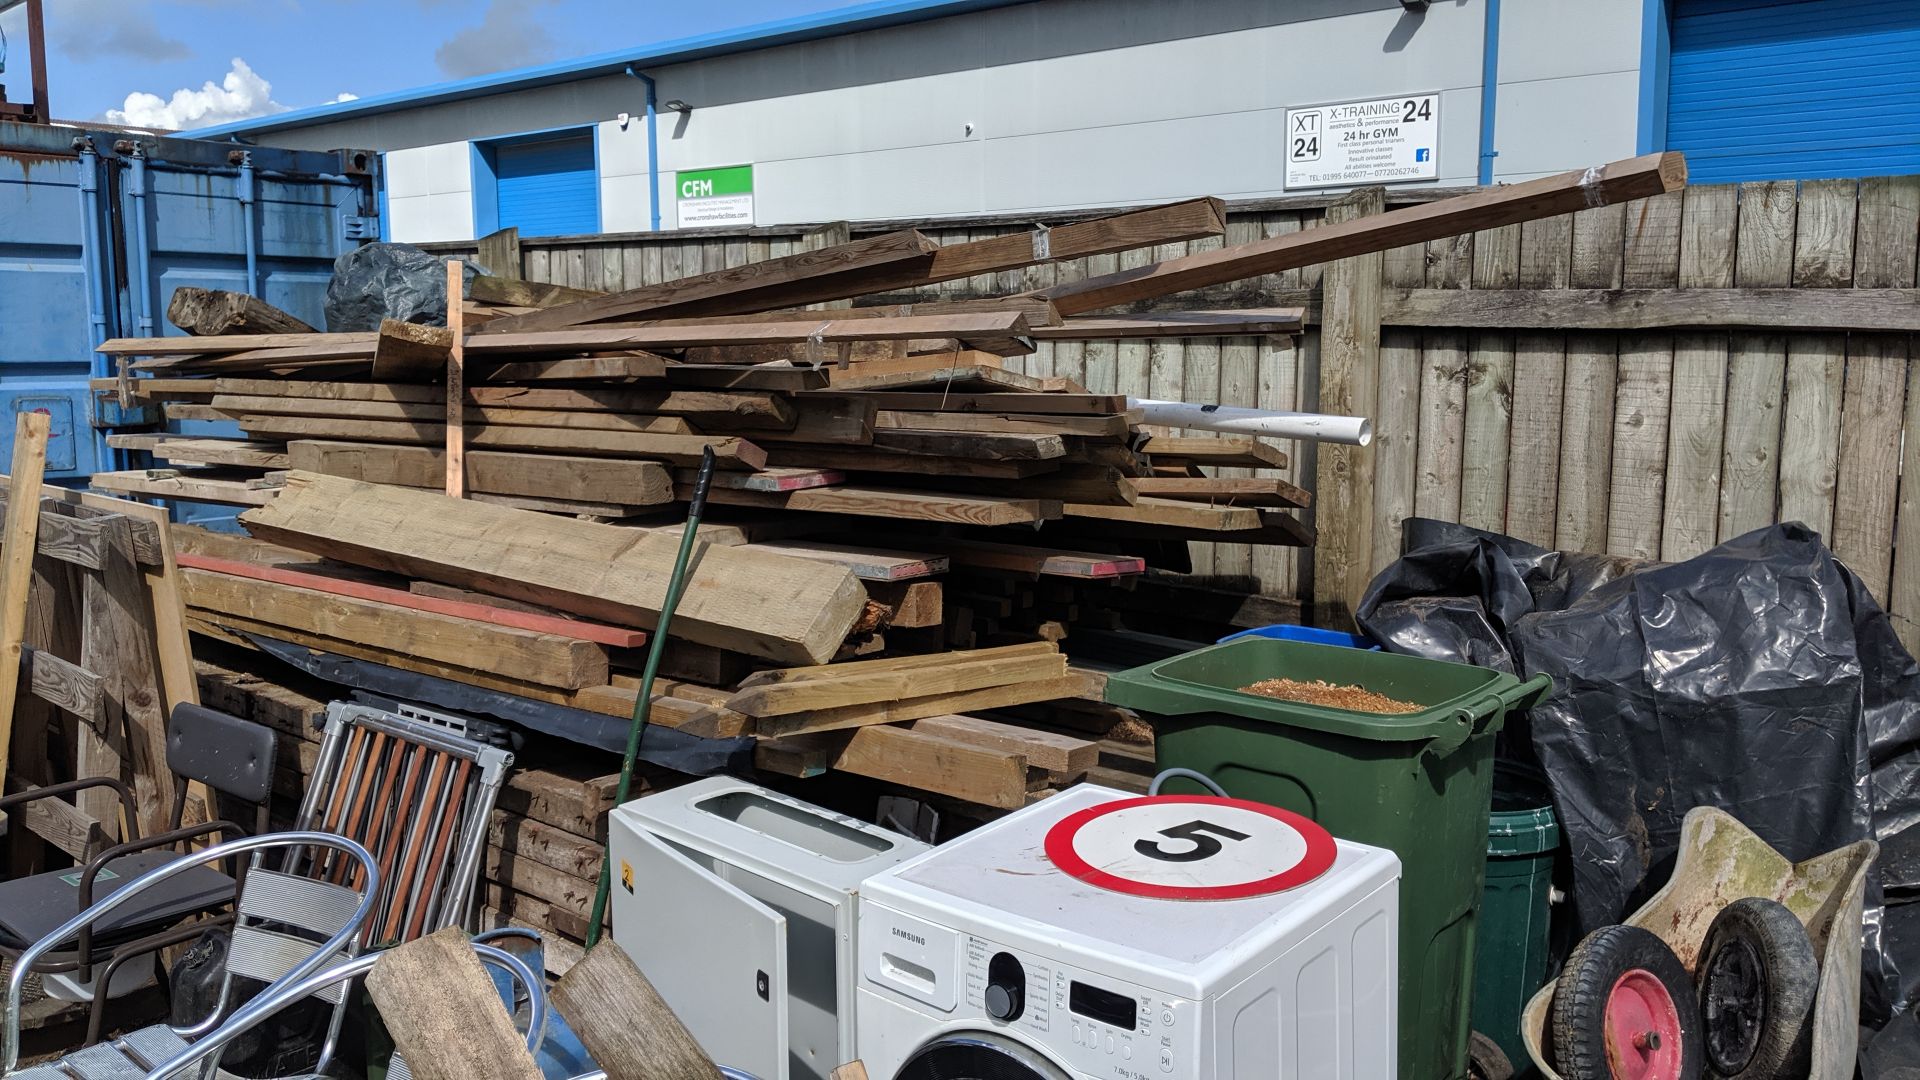 Complete contents of the yard (excluding the two dust extractors and the panels of building cladding - Image 24 of 65